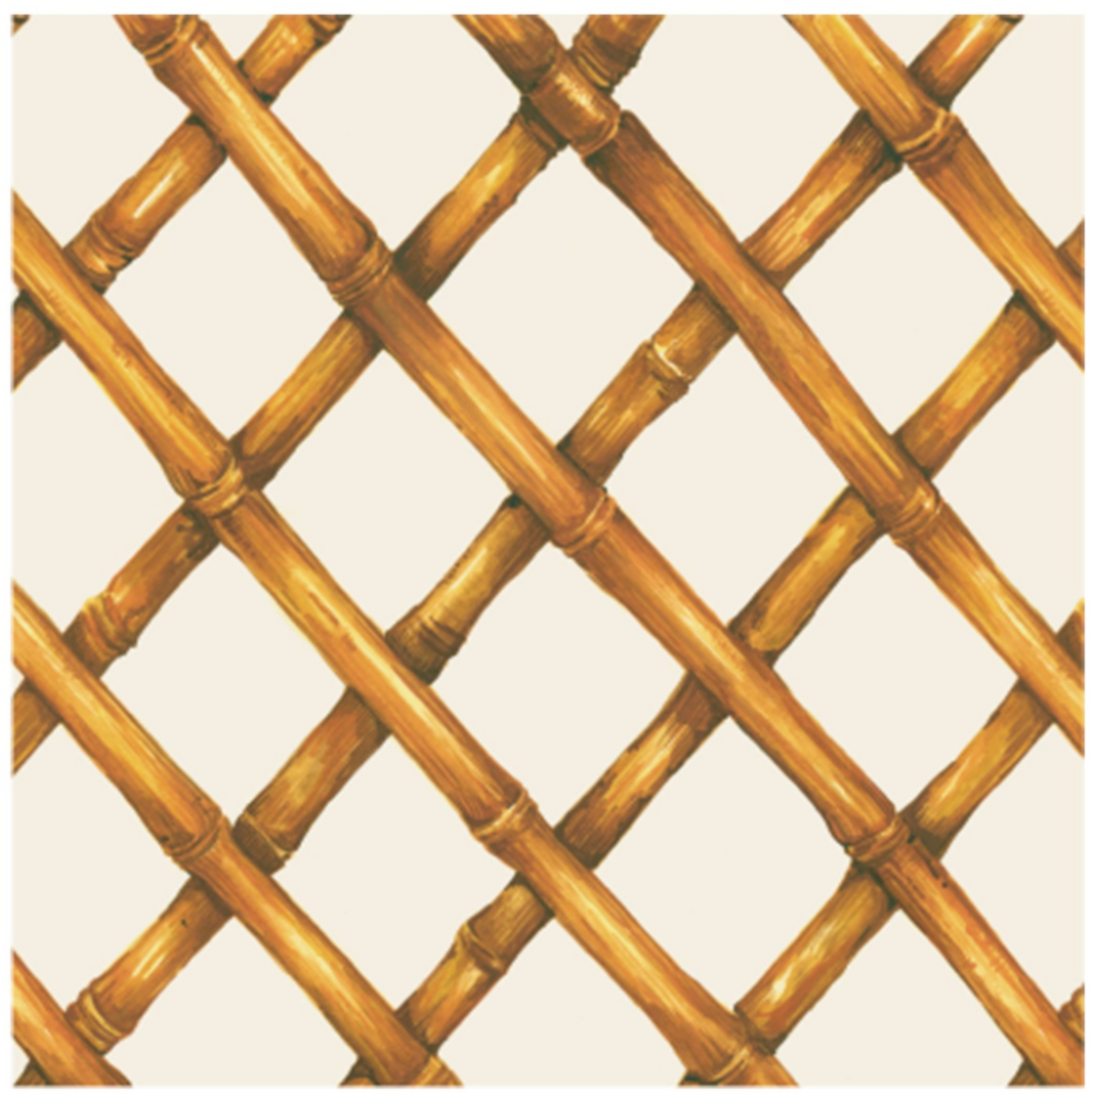 A diagonal woven bamboo pattern in tan on a white background, on a square cocktail napkin.